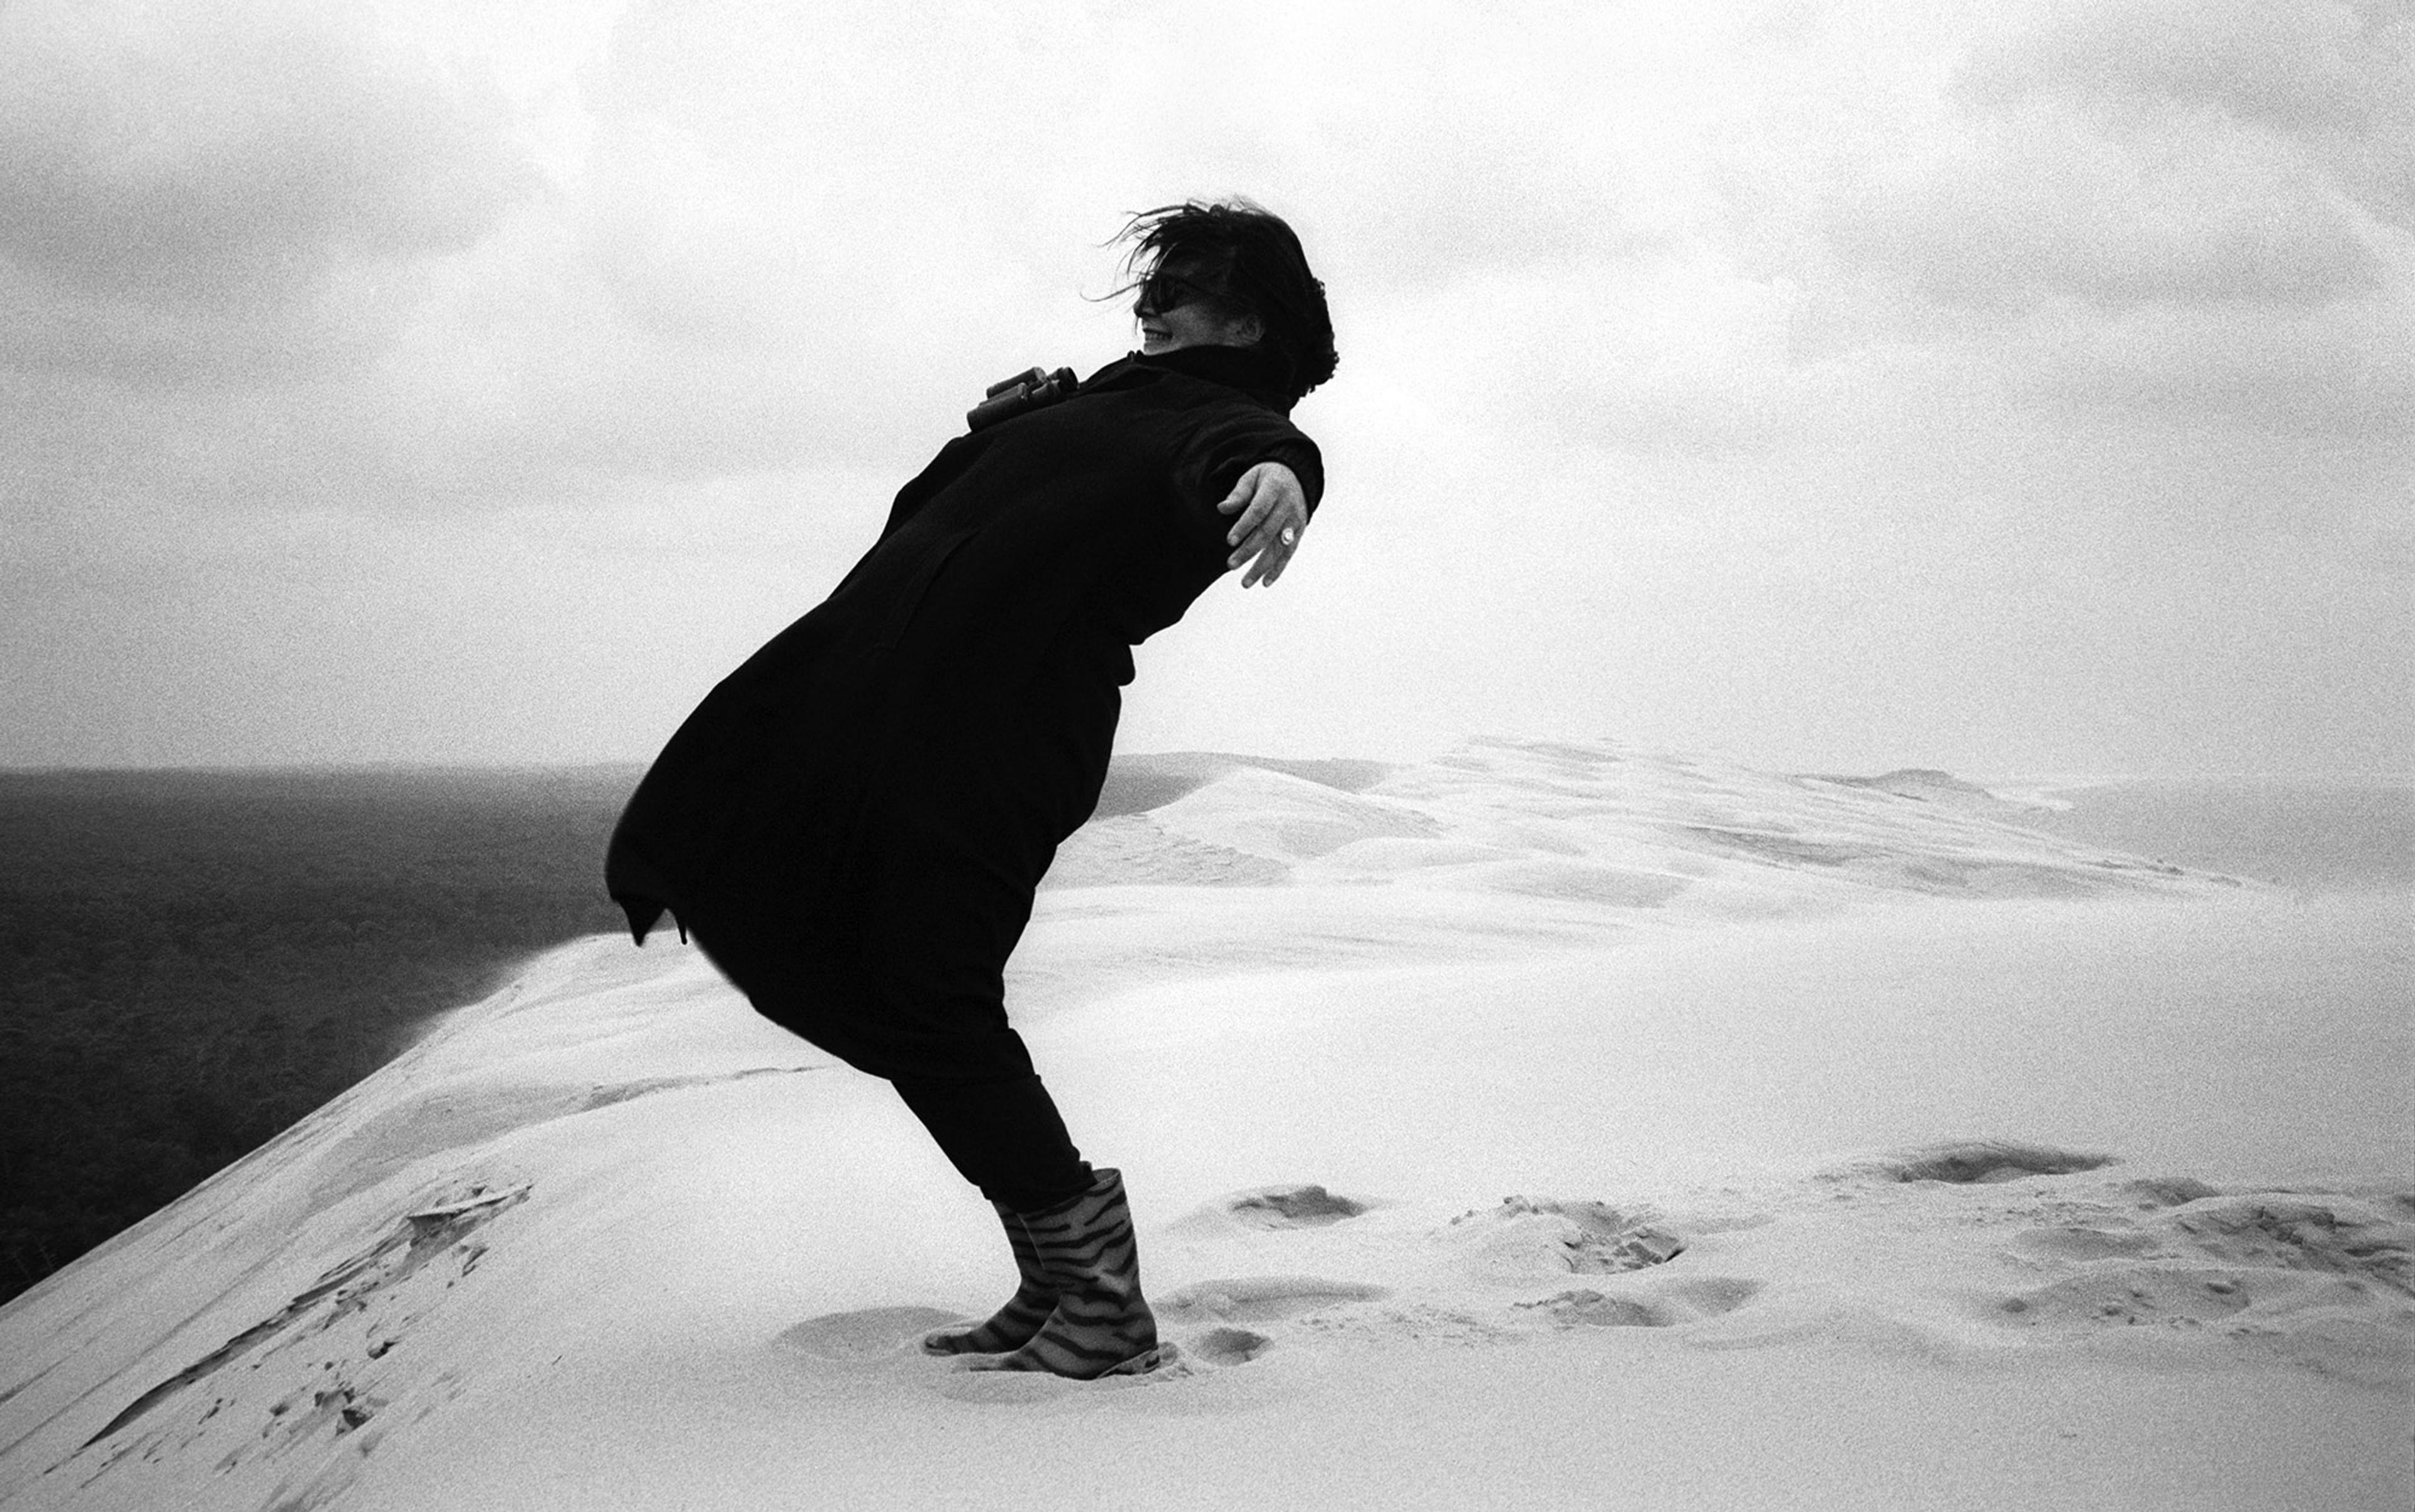 A black and white photograph shows a woman on the edge of a sand dune overlooking the sea leaning back into a strong wind